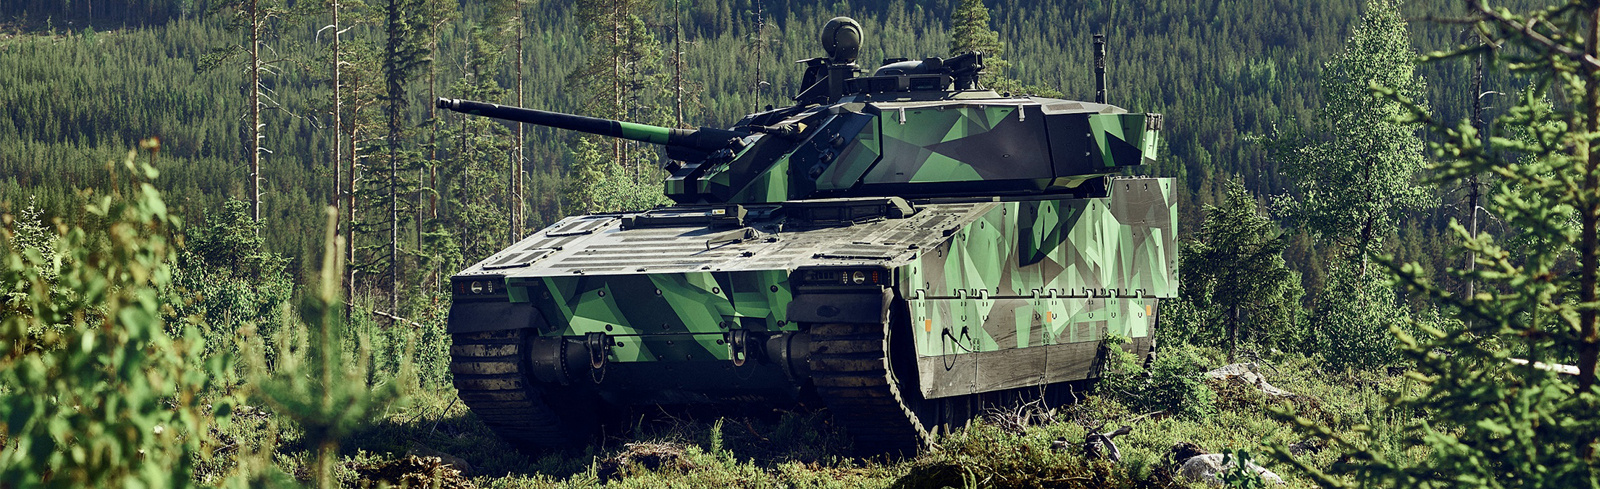 A green-camouflaged CV90 MkIV positioned hillside in a remote wooded area. Supreme mobility, exceptional protection, and outstanding lethality.